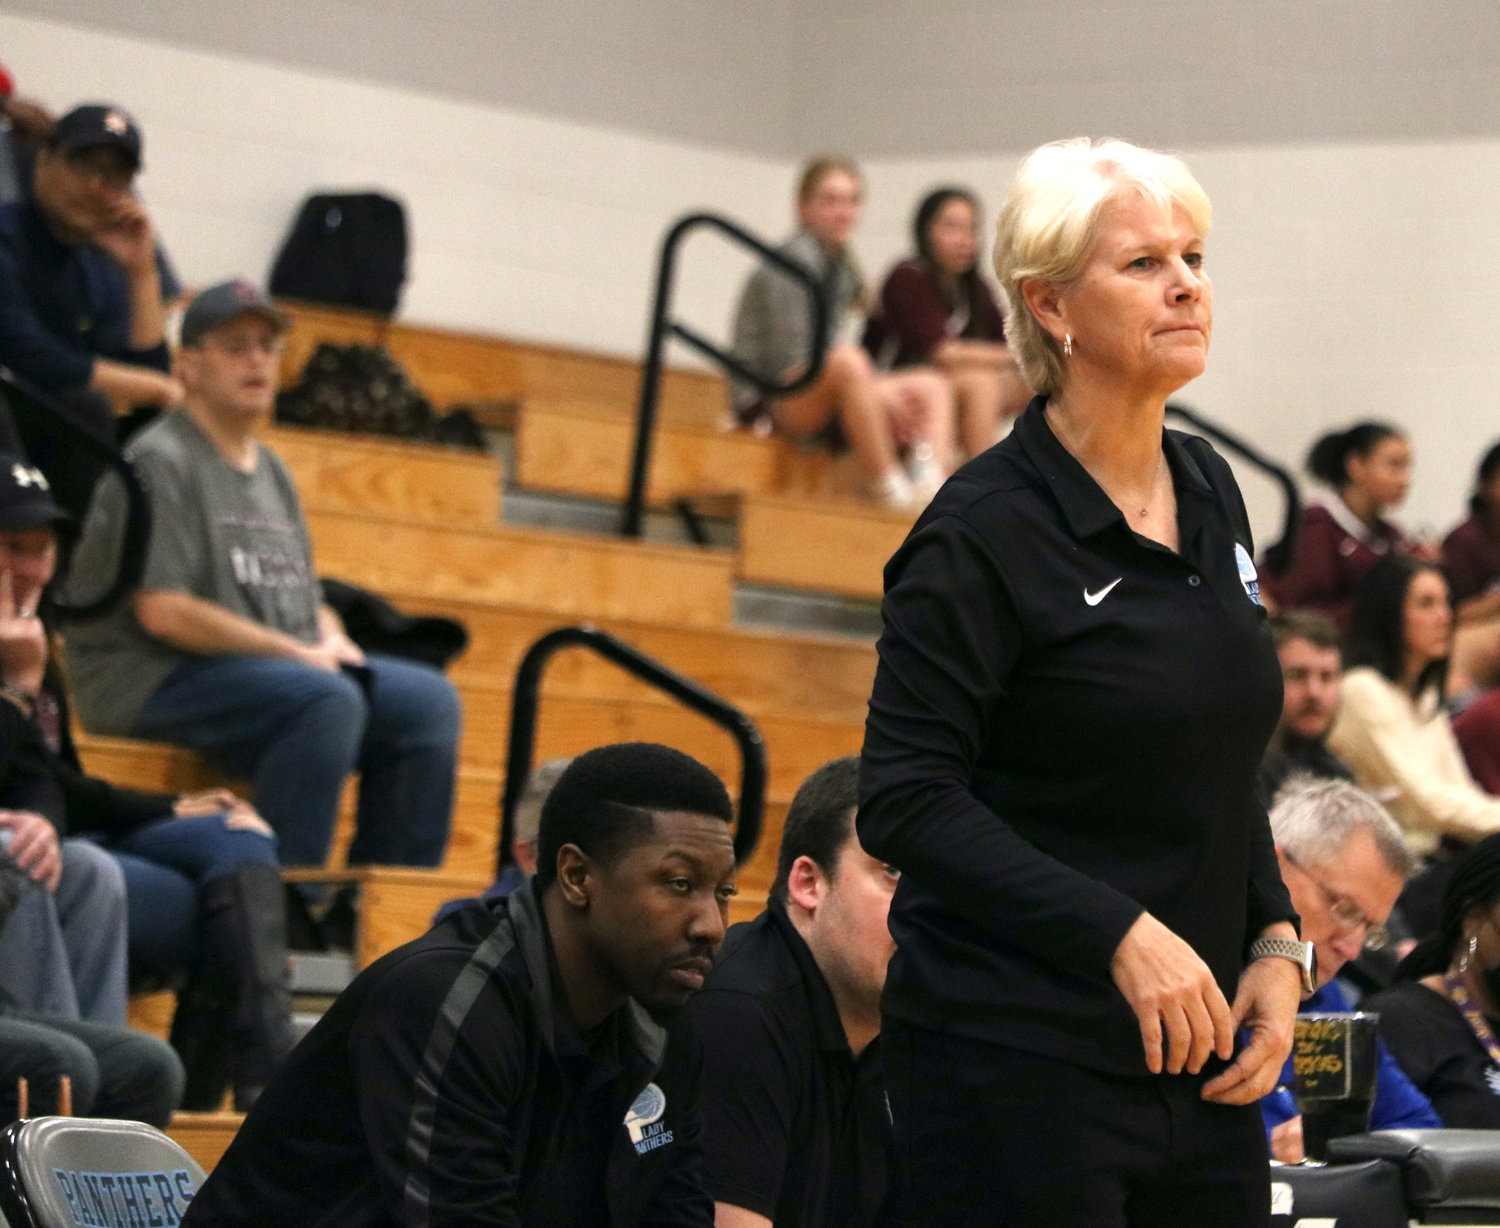 Paetow head coach Stacey Stroman watches her team during Friday's game between Cinco Ranch and Paetow at the Paetow gym.